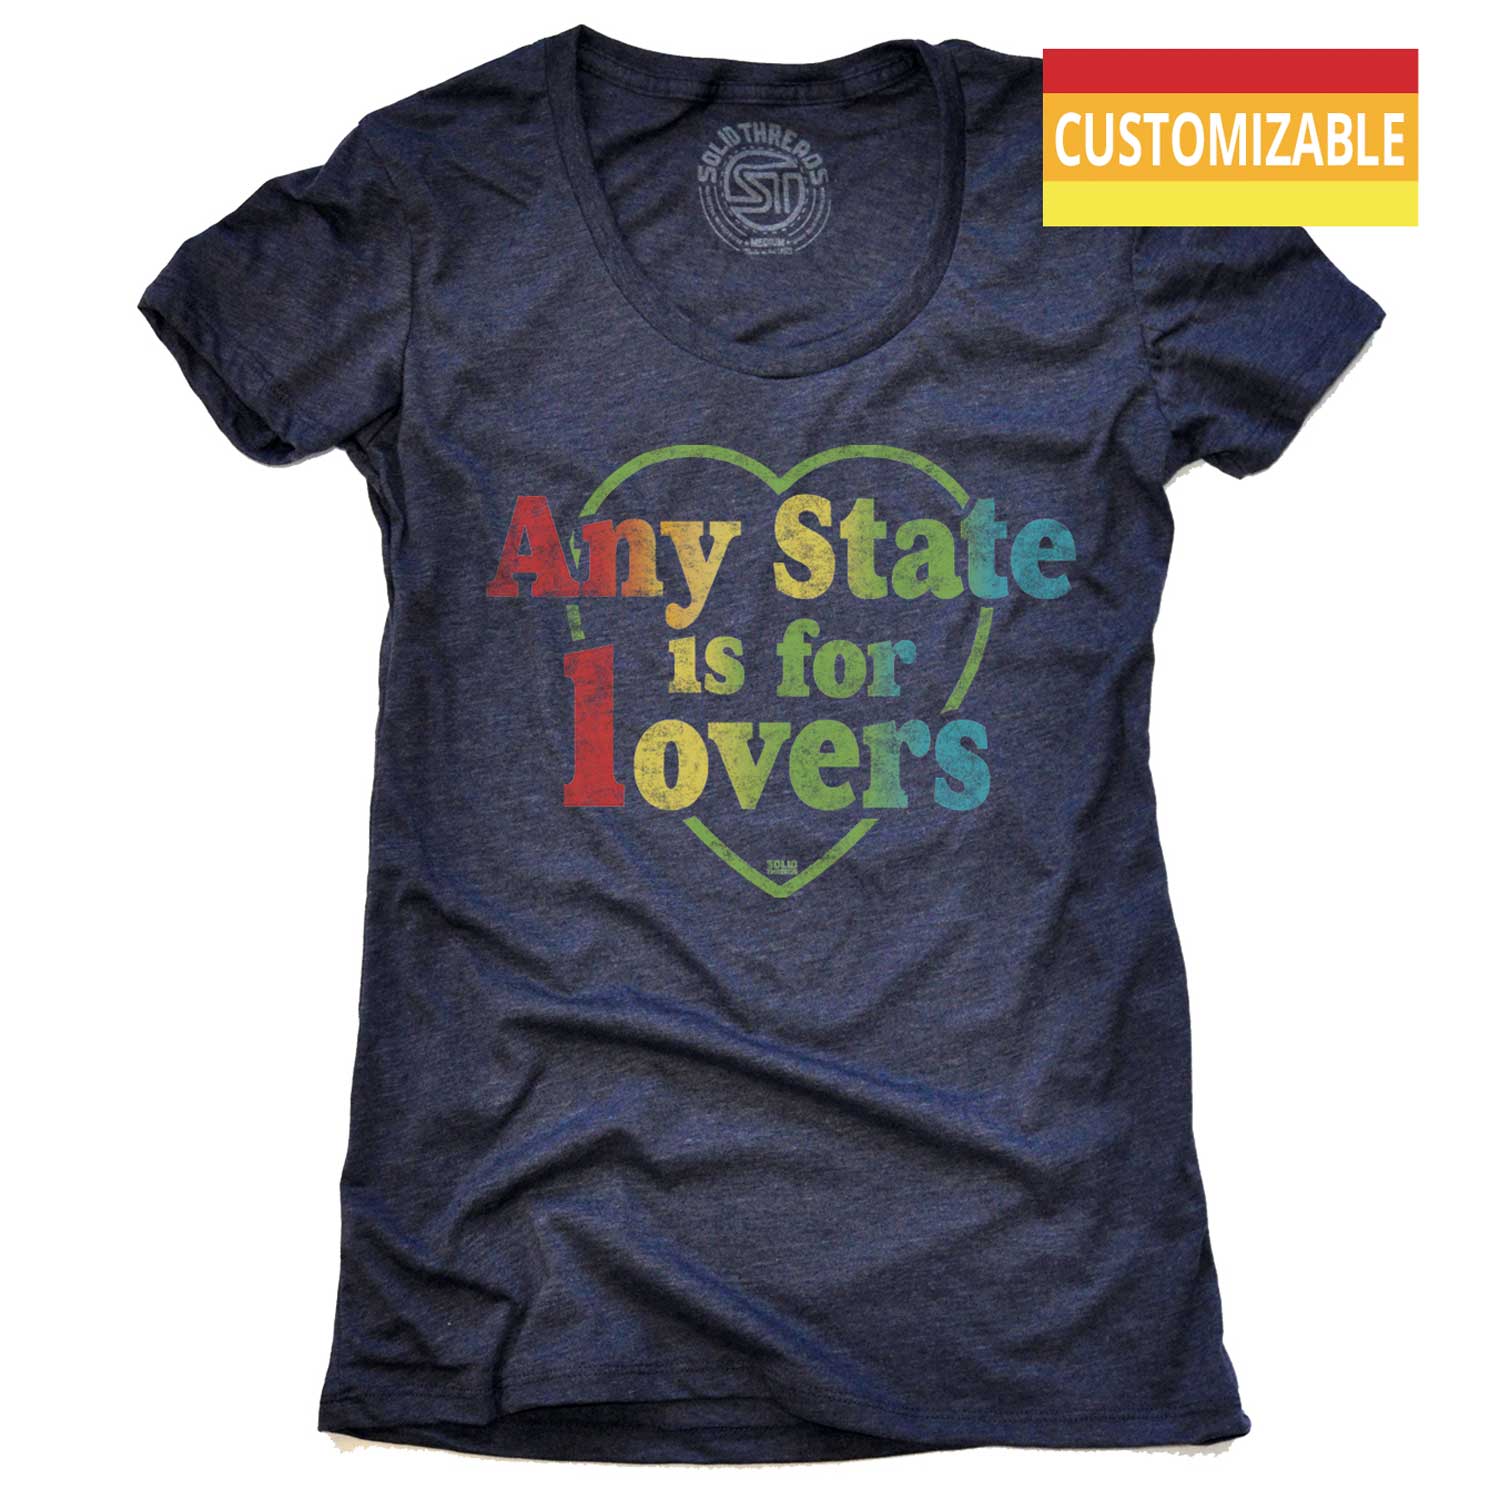 Women's "Any State" Is For Lovers Cool Graphic T-Shirt | Vintage Customized Tee | Solid Threads